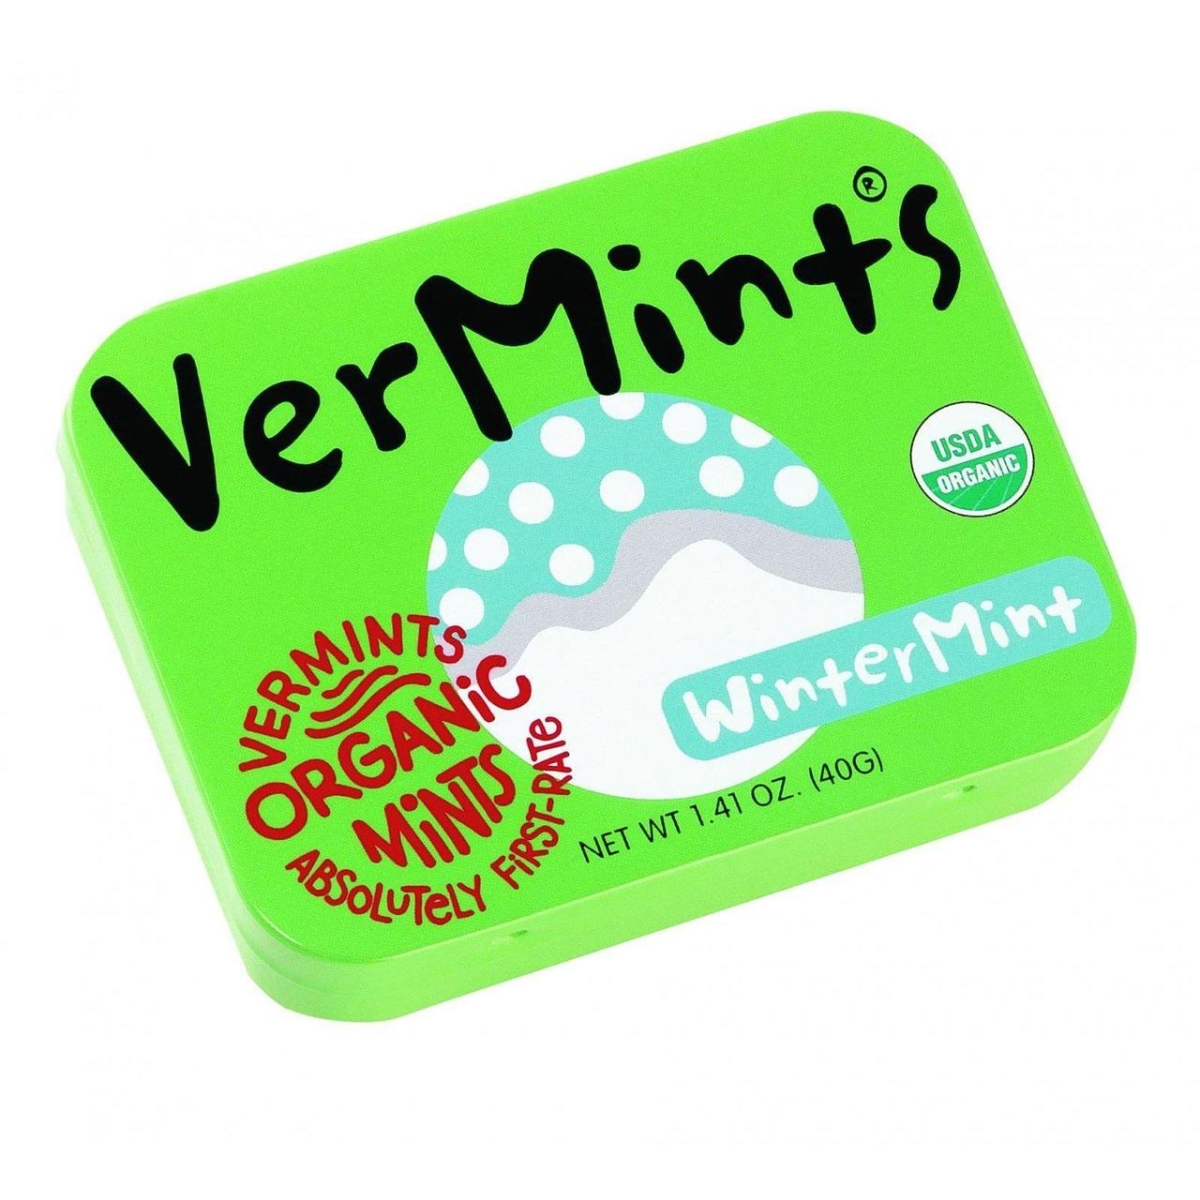 Hg0445940 1.41 Oz Breath Mints All Natural, Wintermint - Case Of 6